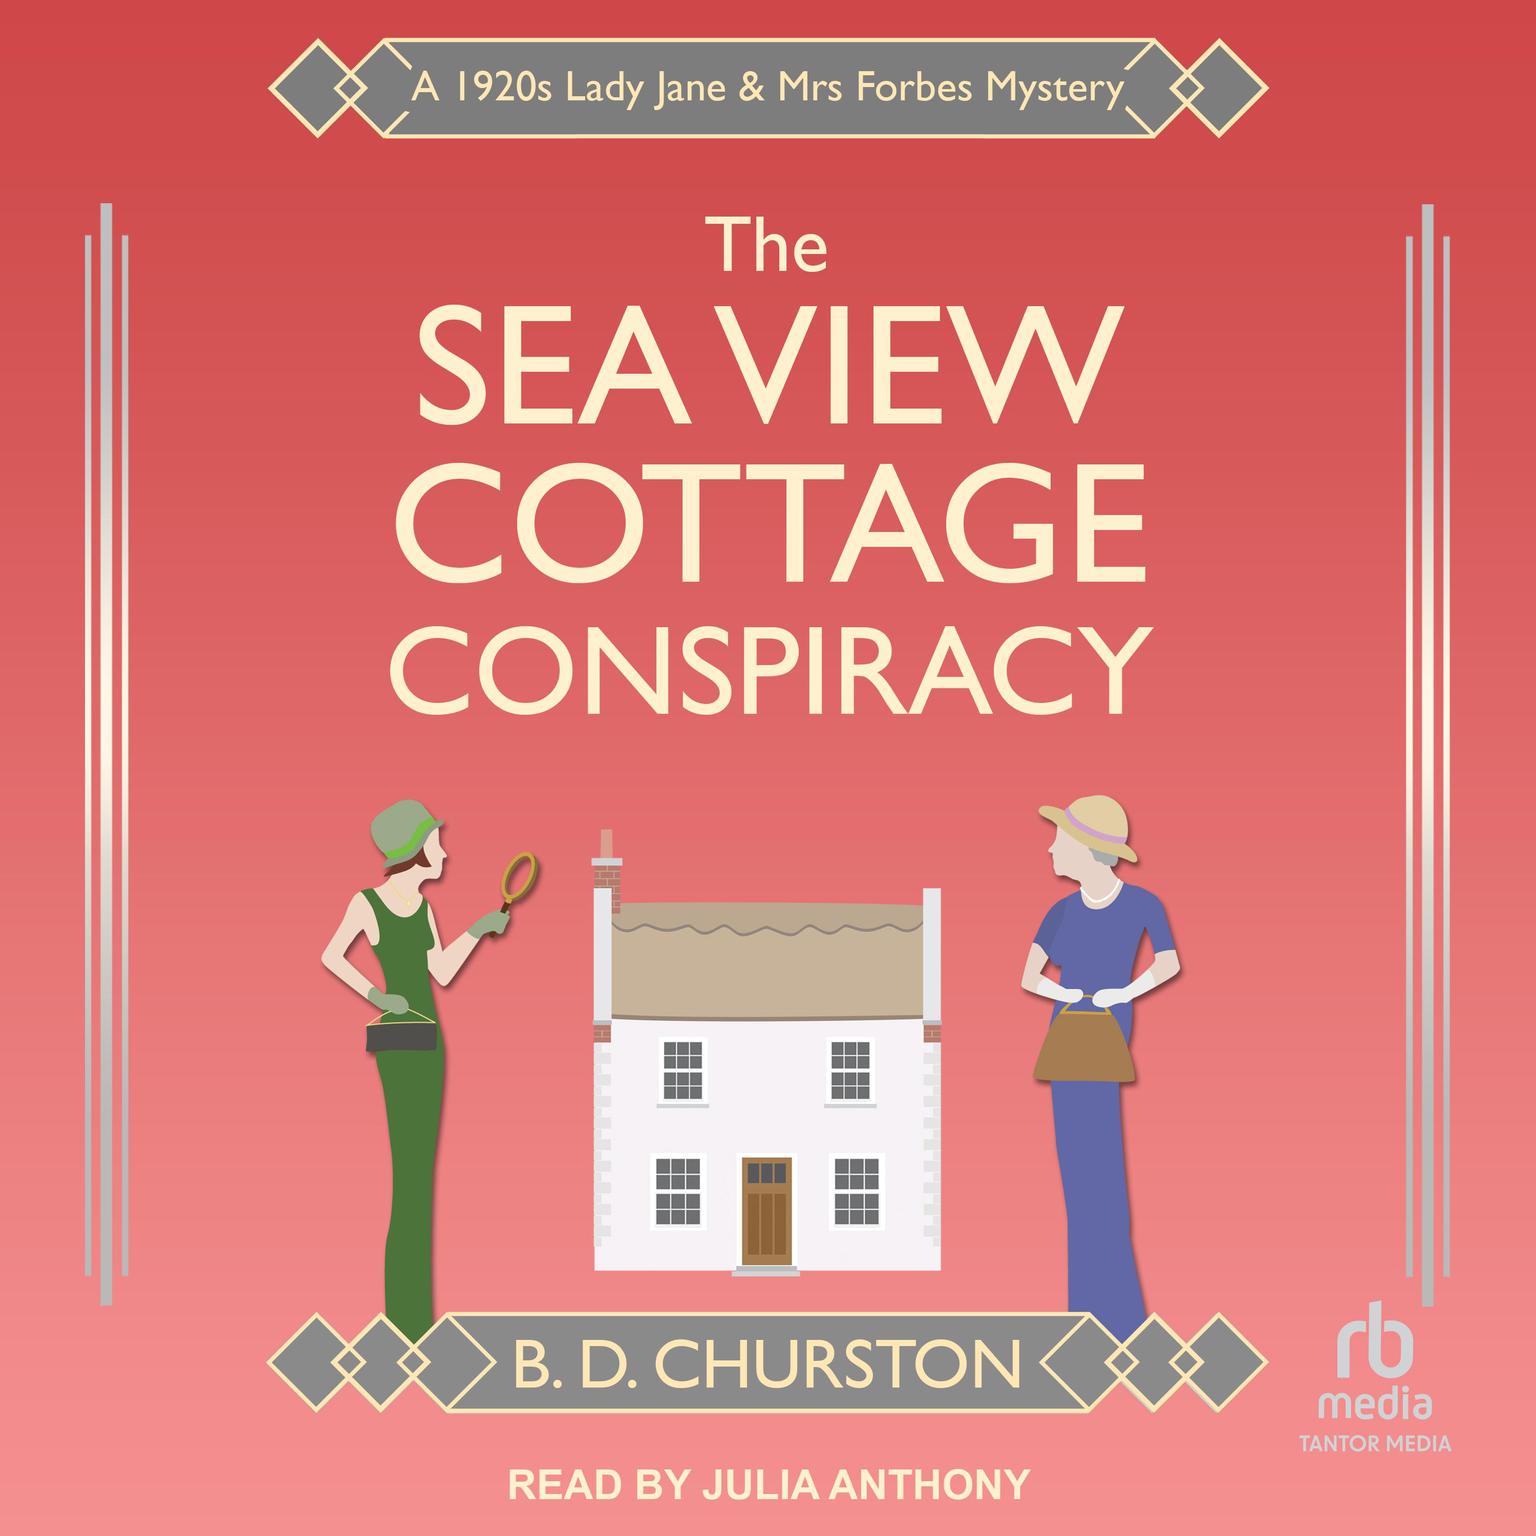 The Sea View Cottage Conspiracy: A 1920s Lady Jane & Mrs Forbes Mystery Audiobook, by B. D. Churston